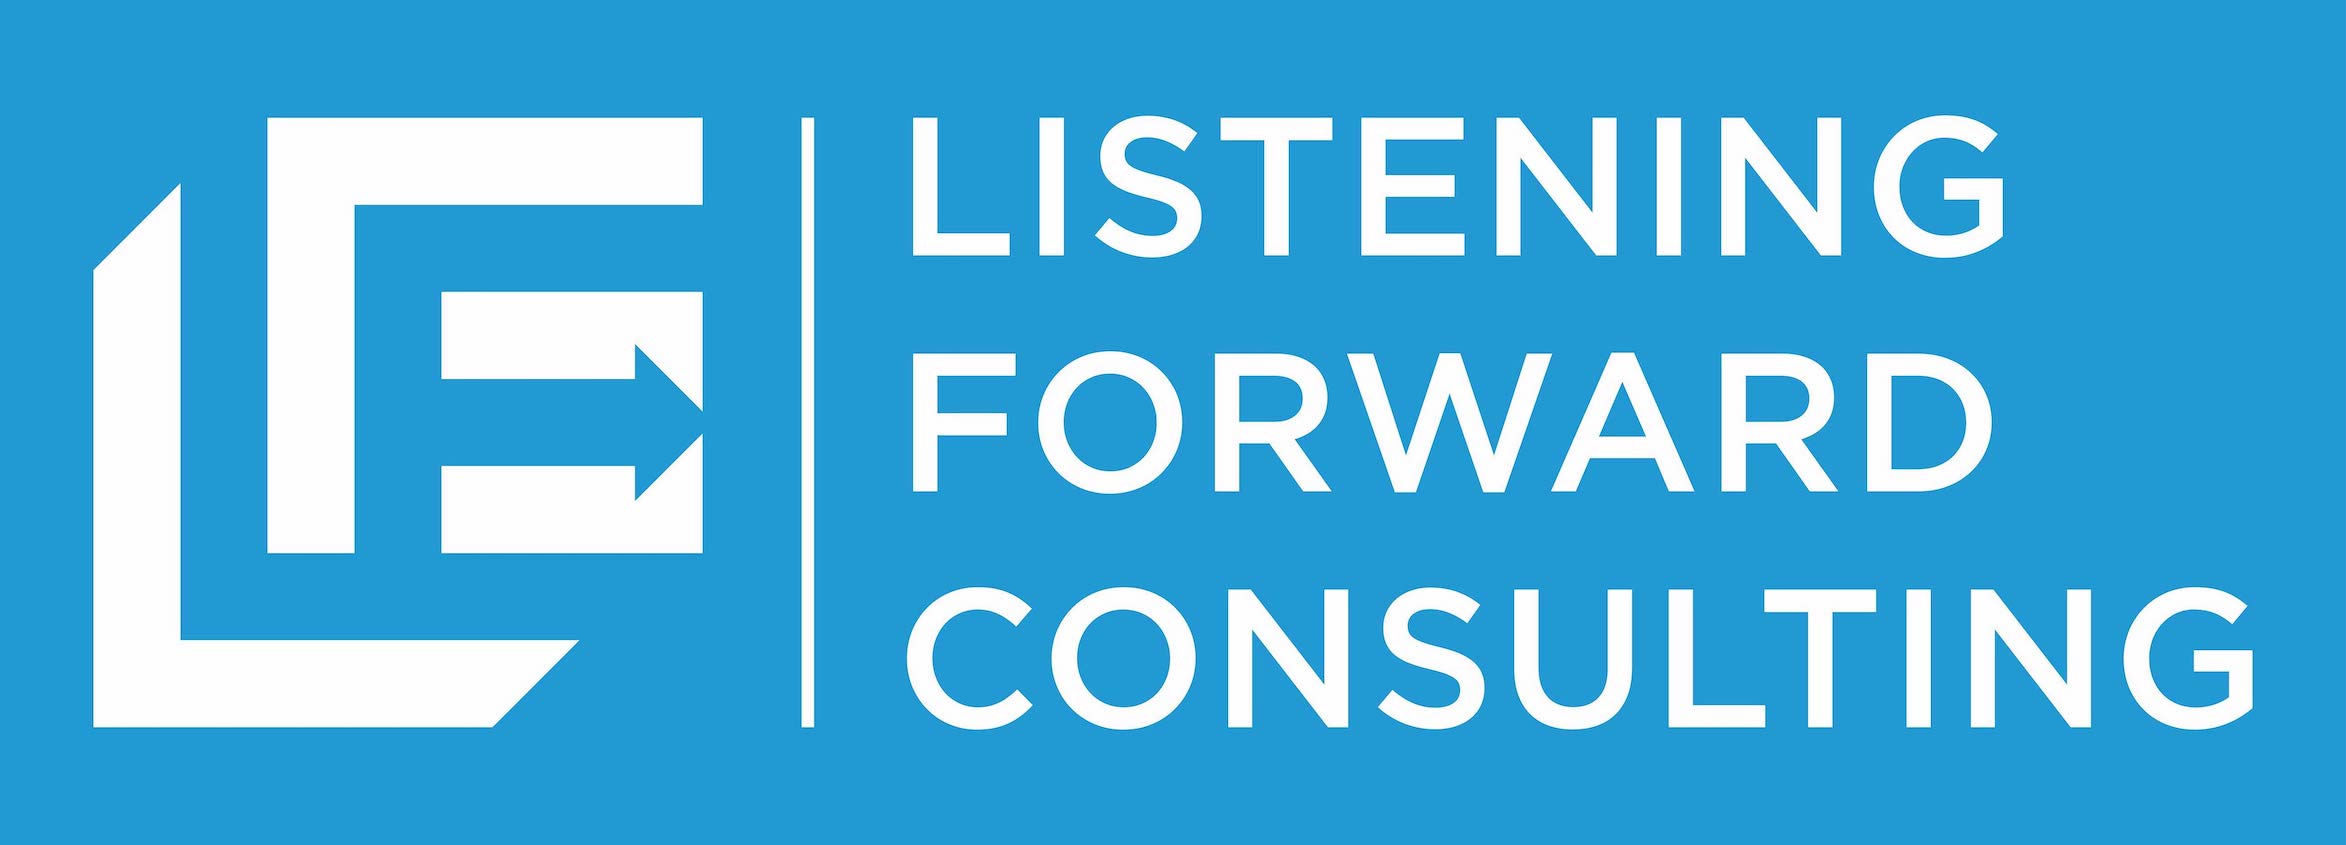 Listening Forward Consulting